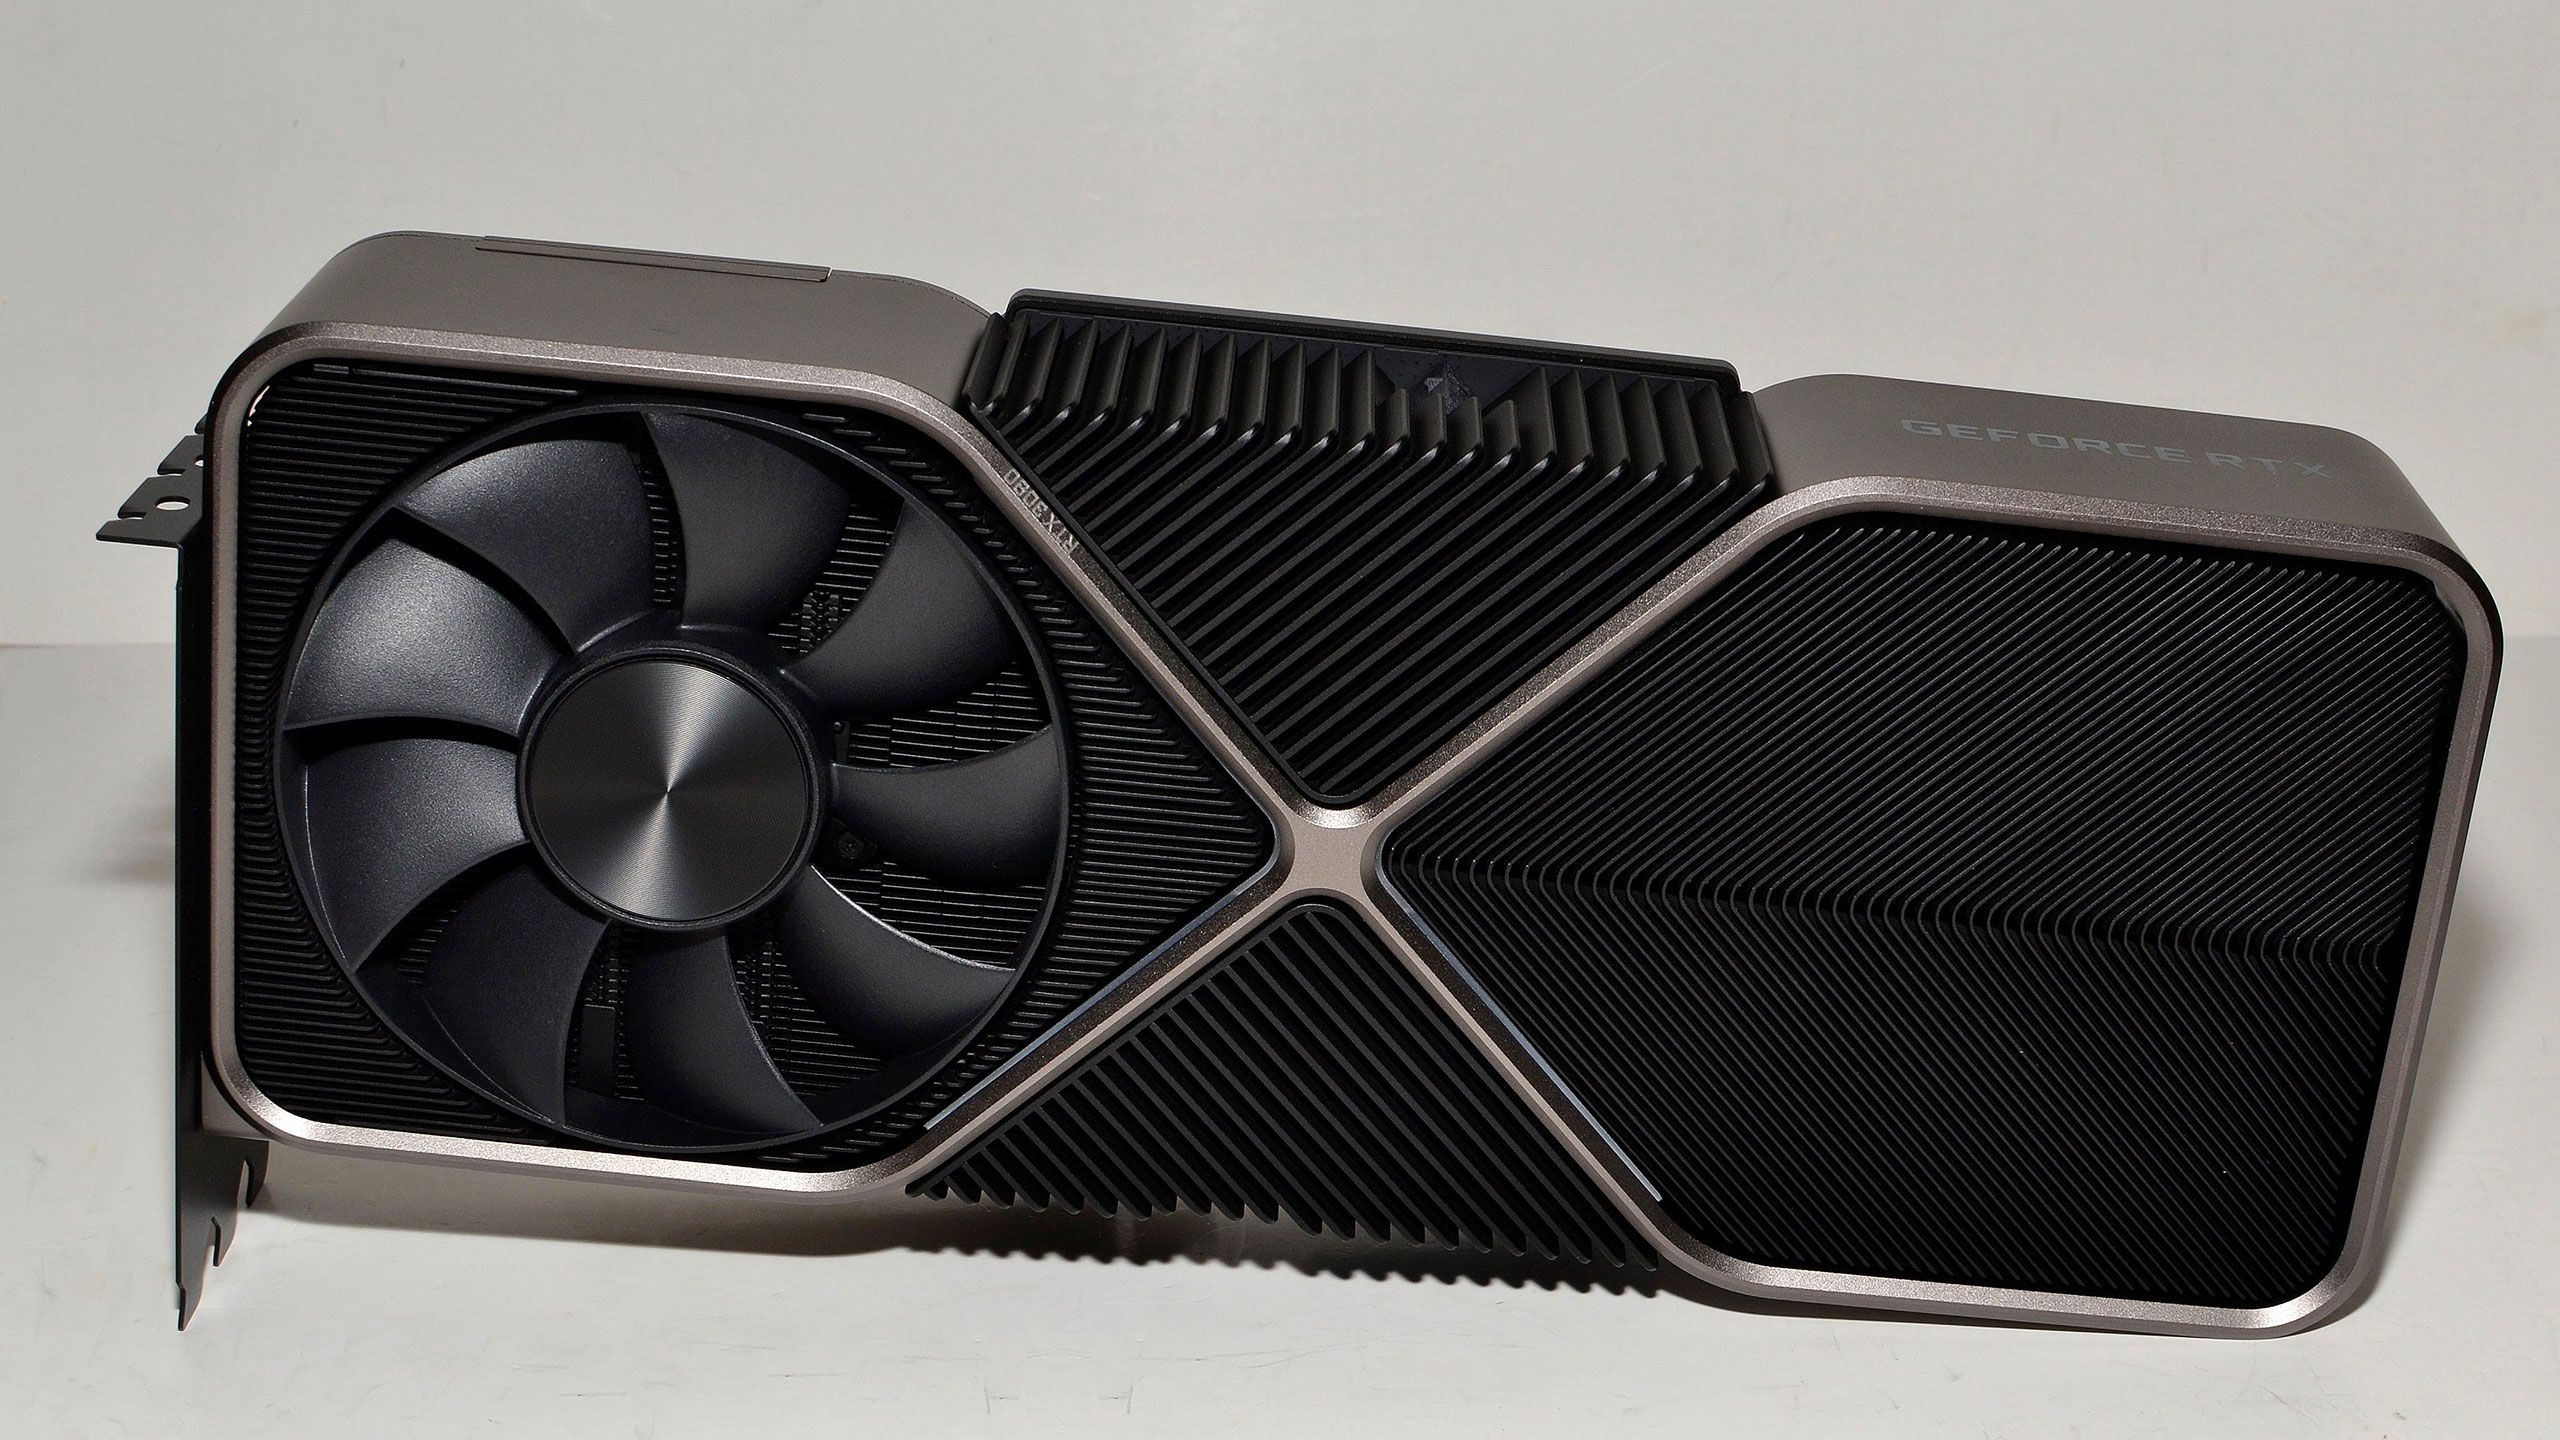 Nvidia GeForce RTX 3090 Founders Edition Review: Heir to the Titan Throne. Tom's Hardware